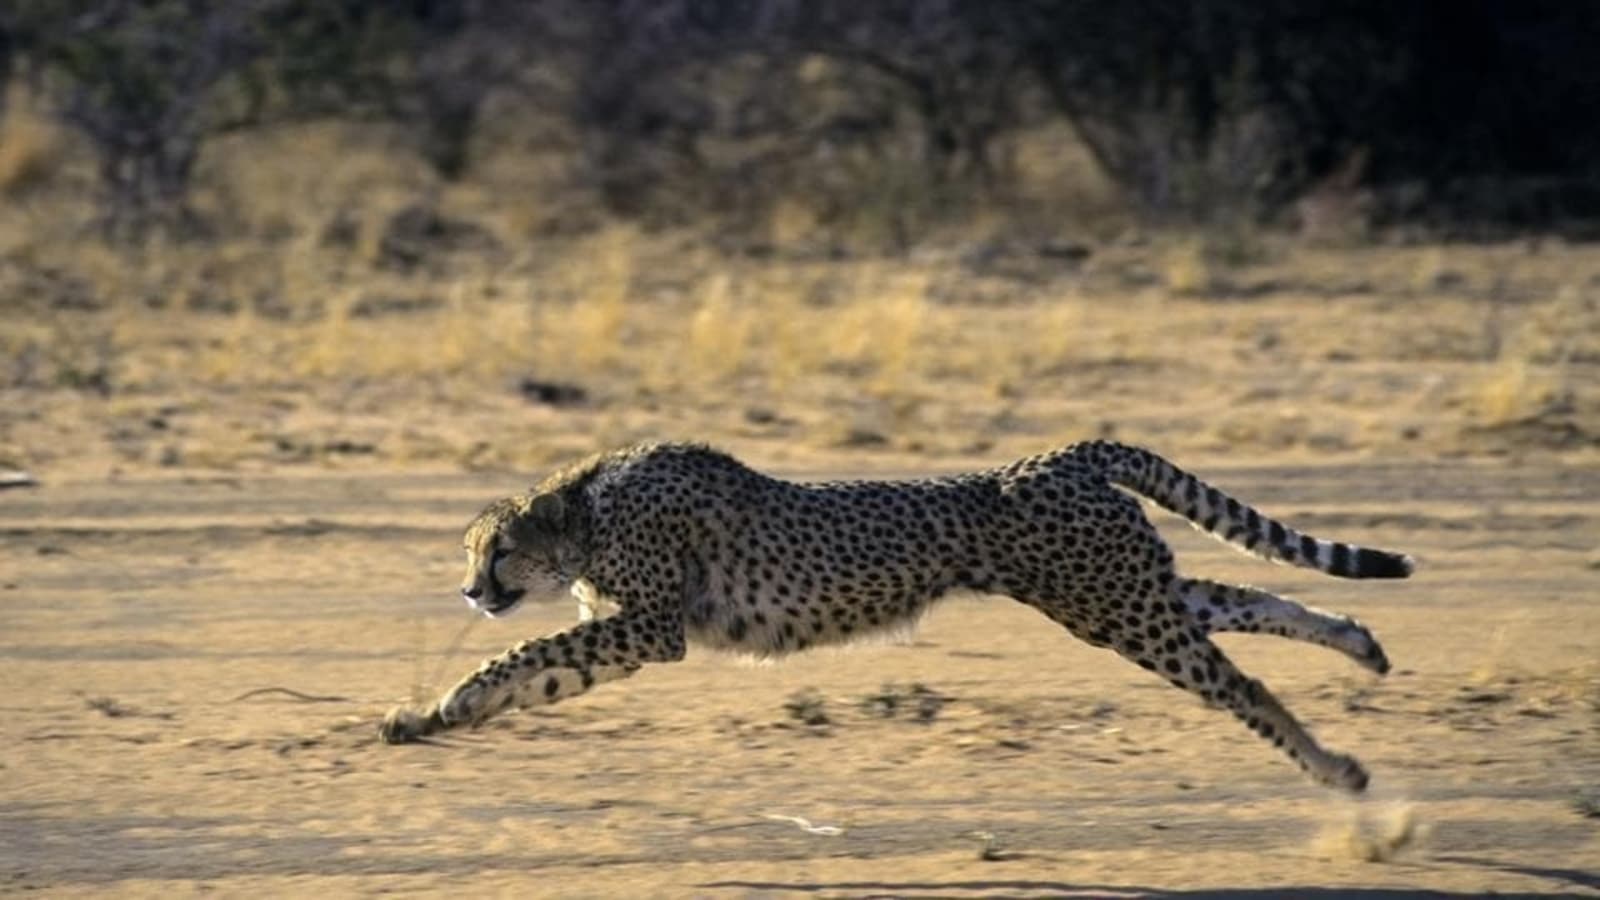 Where the cheetah's speed comes from | Latest News India ...